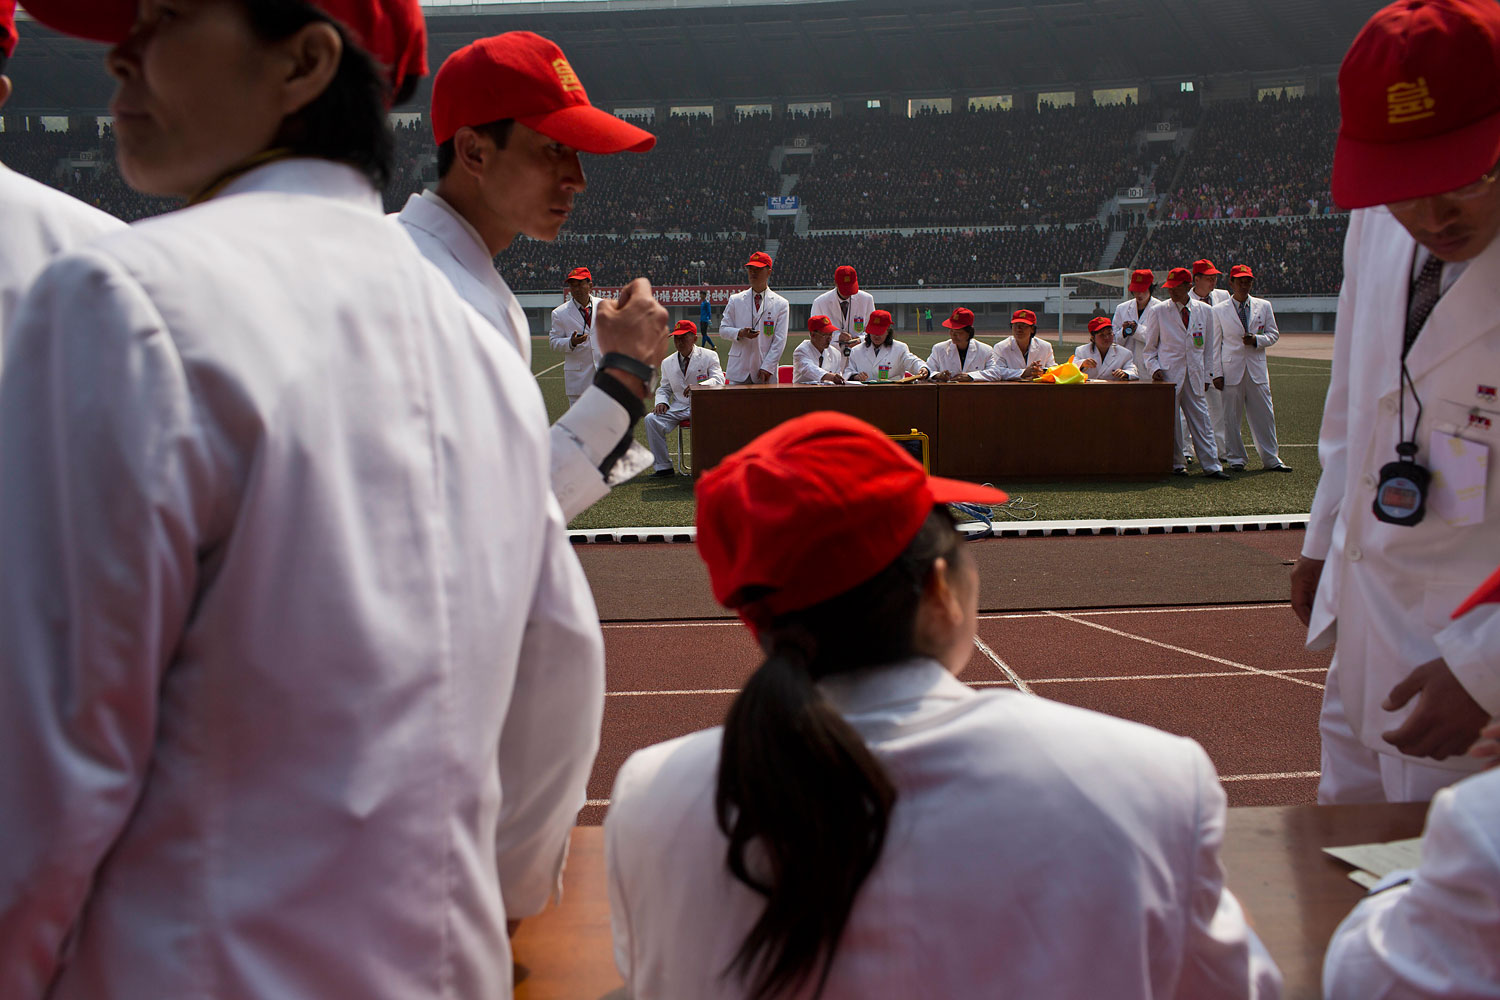 North Korean race officials stand at the finish line inside Kim Il Sung Stadium during the running of the Mangyongdae Prize International Marathon in Pyongyang on April 13, 2014.